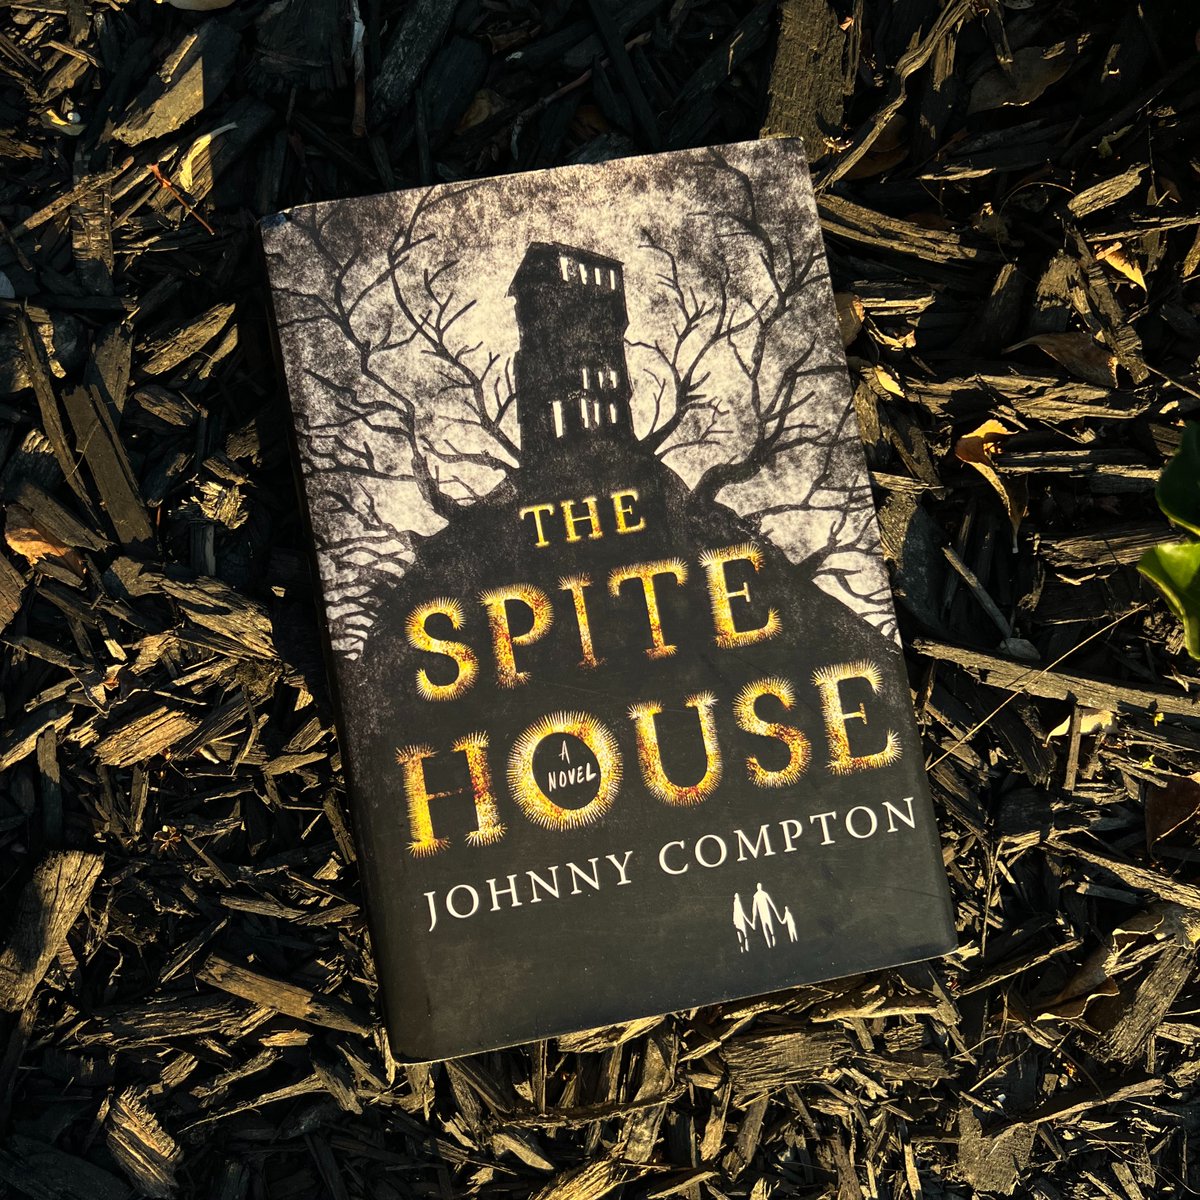 “@ComptonWrites’ The Spite House is the modern Gothic story full of dread we’ve all been waiting for. This strange house...will steal a part of you and never give it back.”—@cinapelayo, Bram Stoker Award–nominated author of Children of Chicago tornightfire.com/catalog/the-sp…